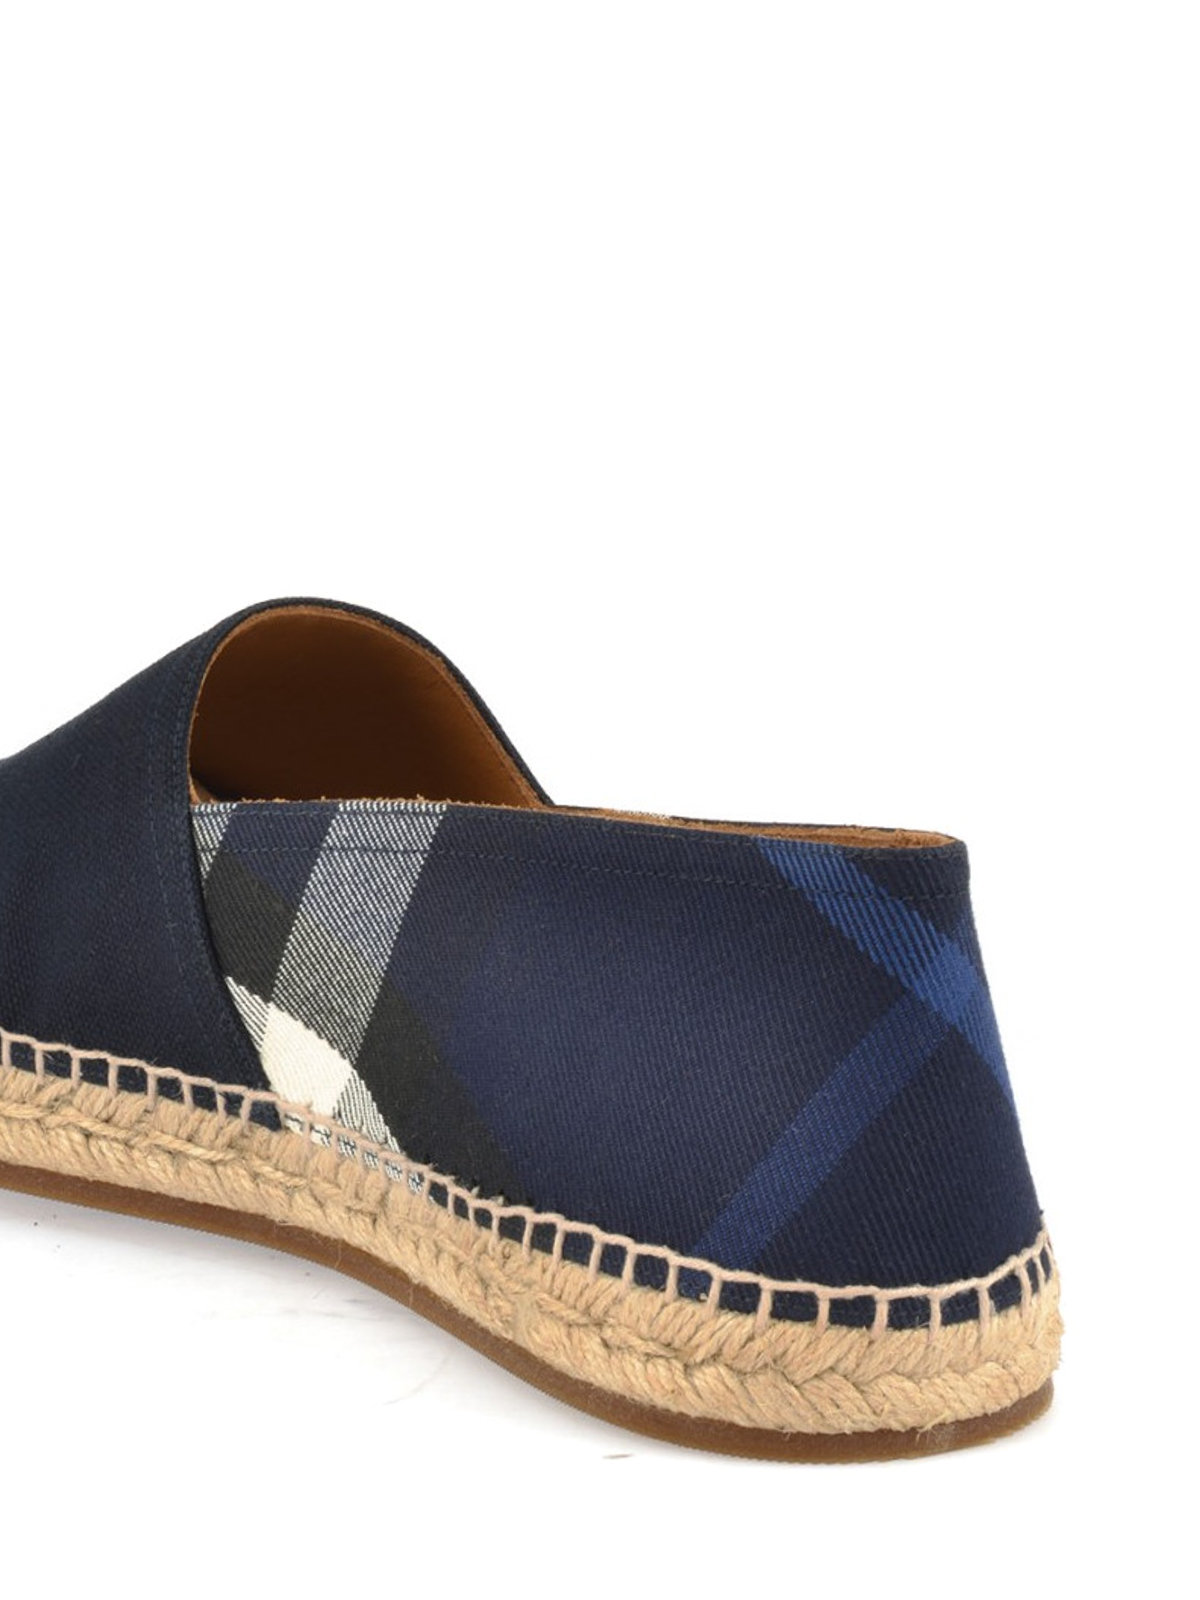 Checked leather canvas espadrilles 